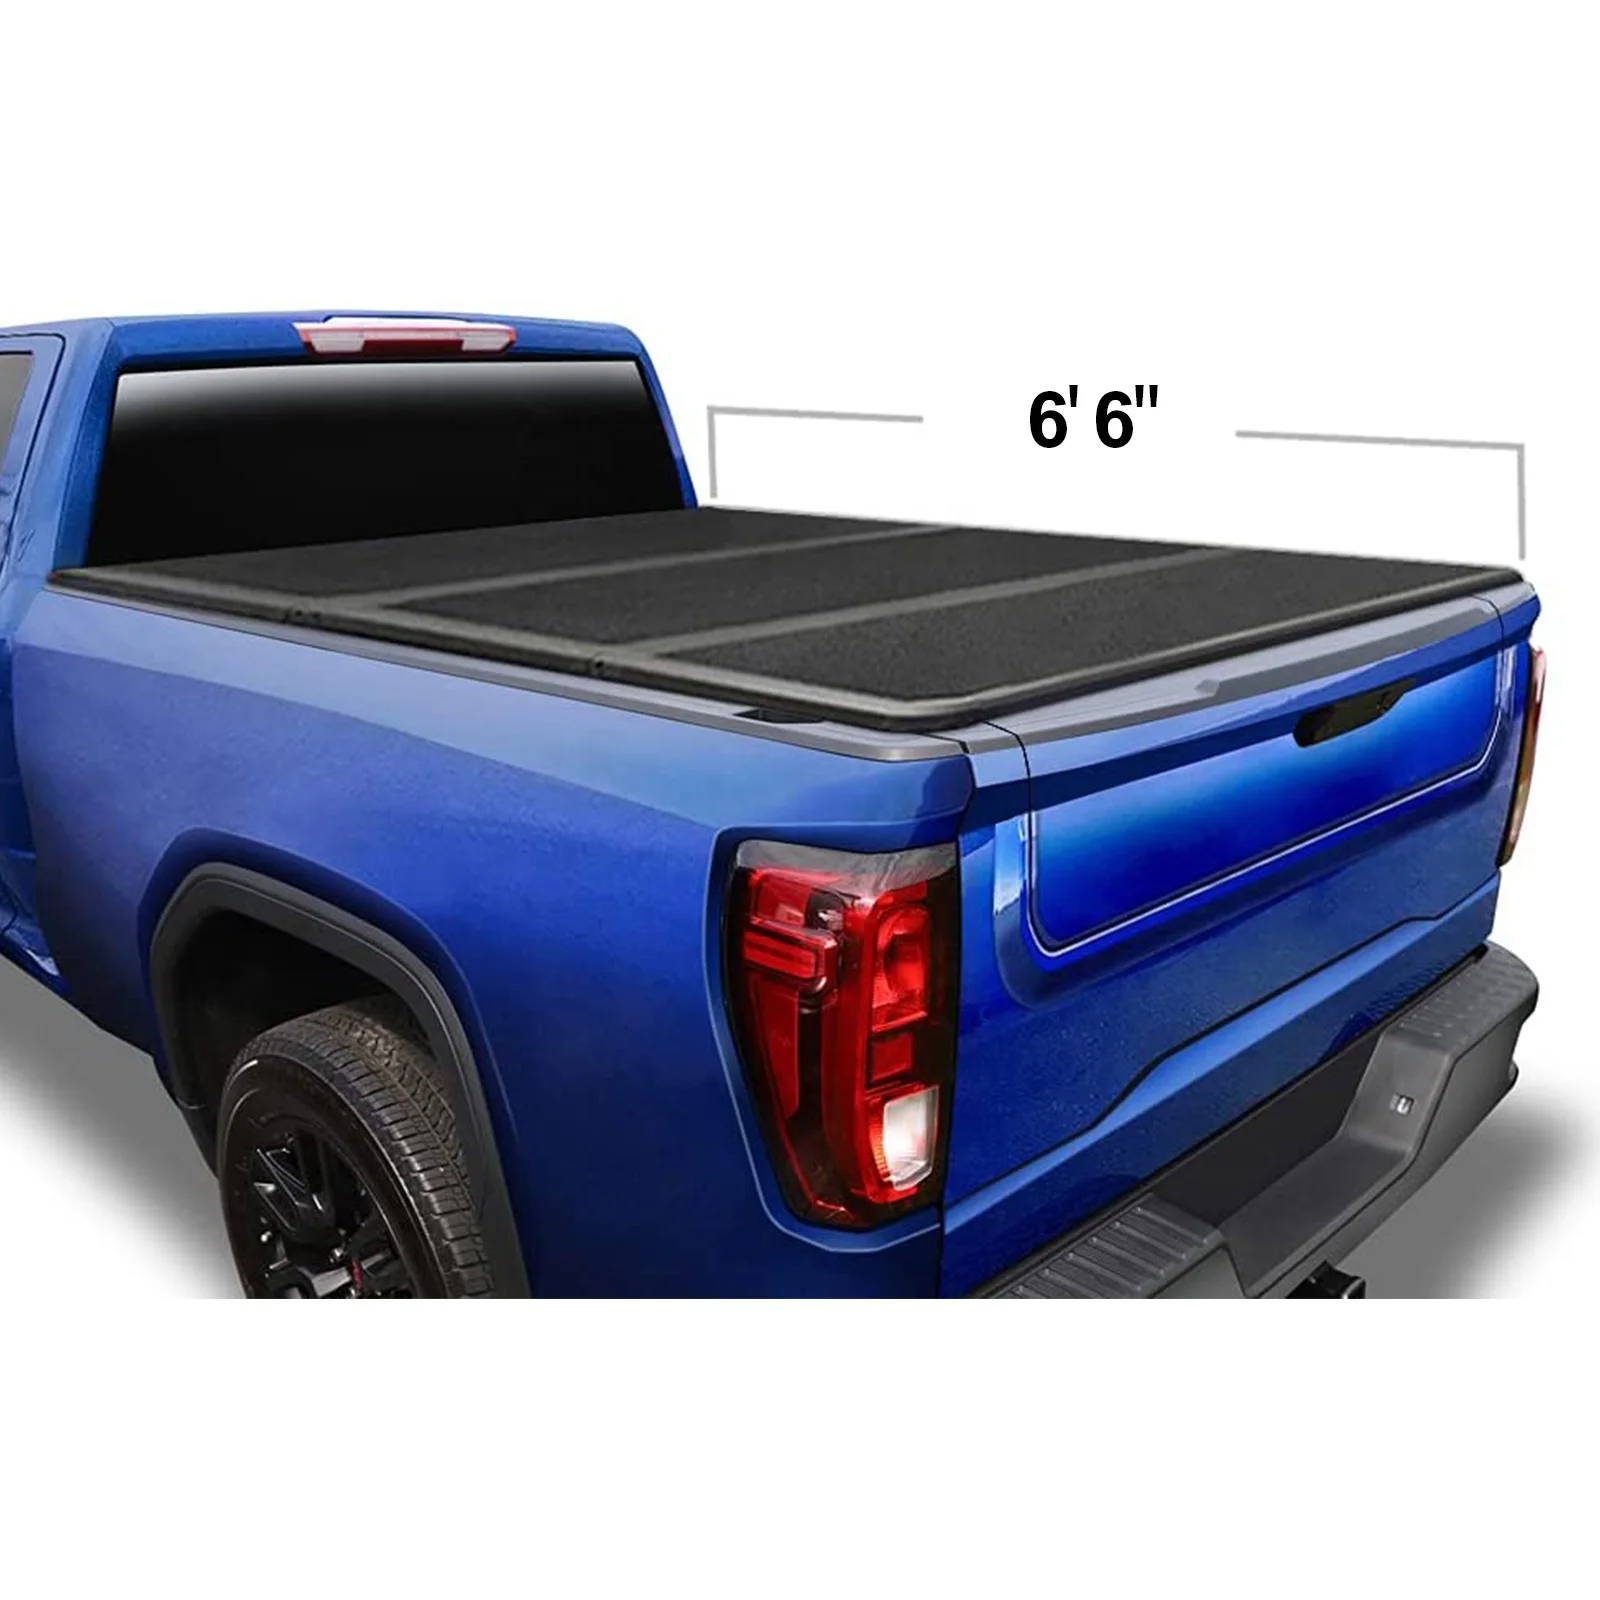 

New Listing Direct Selling Hard Three-Fold Bed Cover For Truck for Chevrolet GMC Std Short Bed 6.6FT